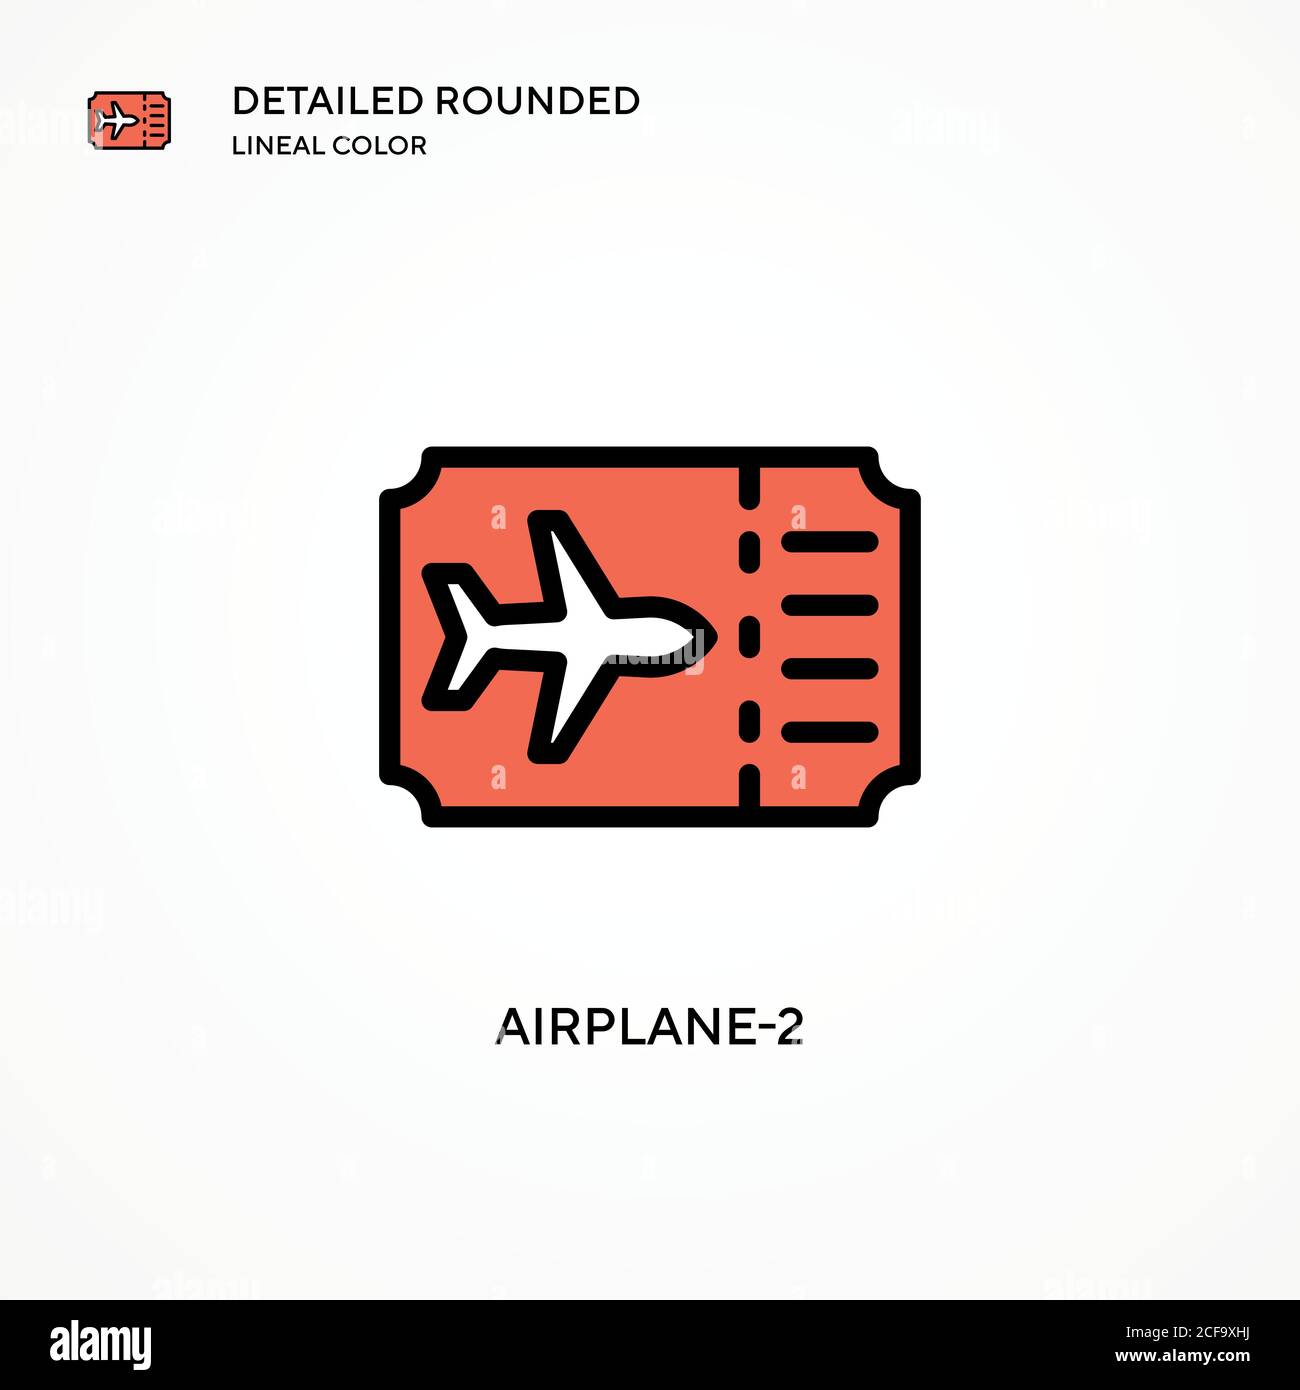 Airplane-2 vector icon. Modern vector illustration concepts. Easy to edit and customize. Stock Vector